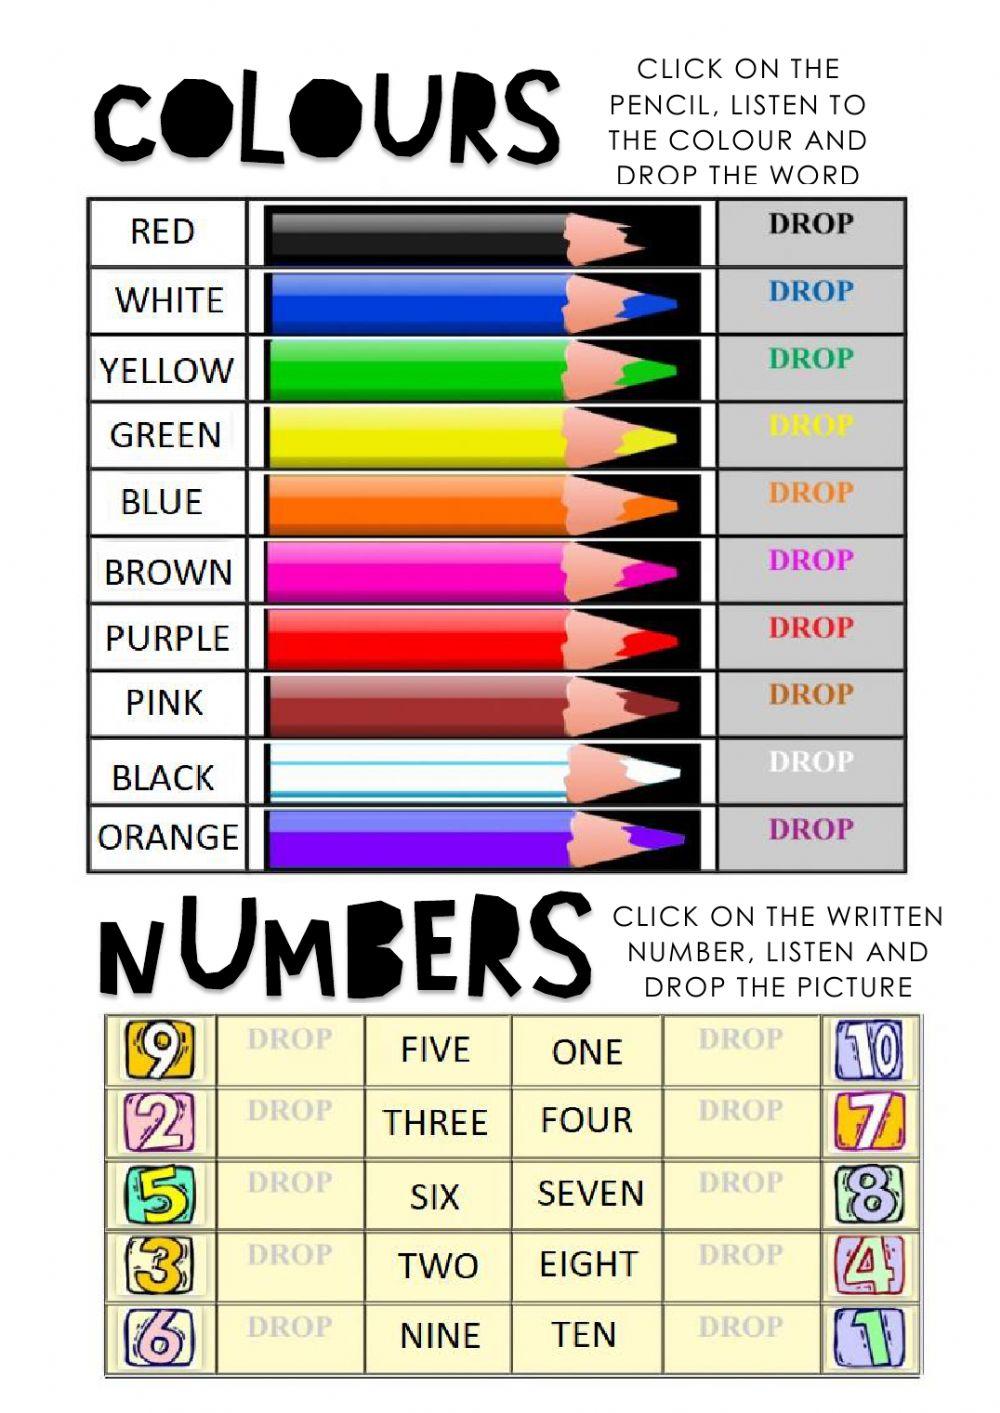 Colours and Numbers